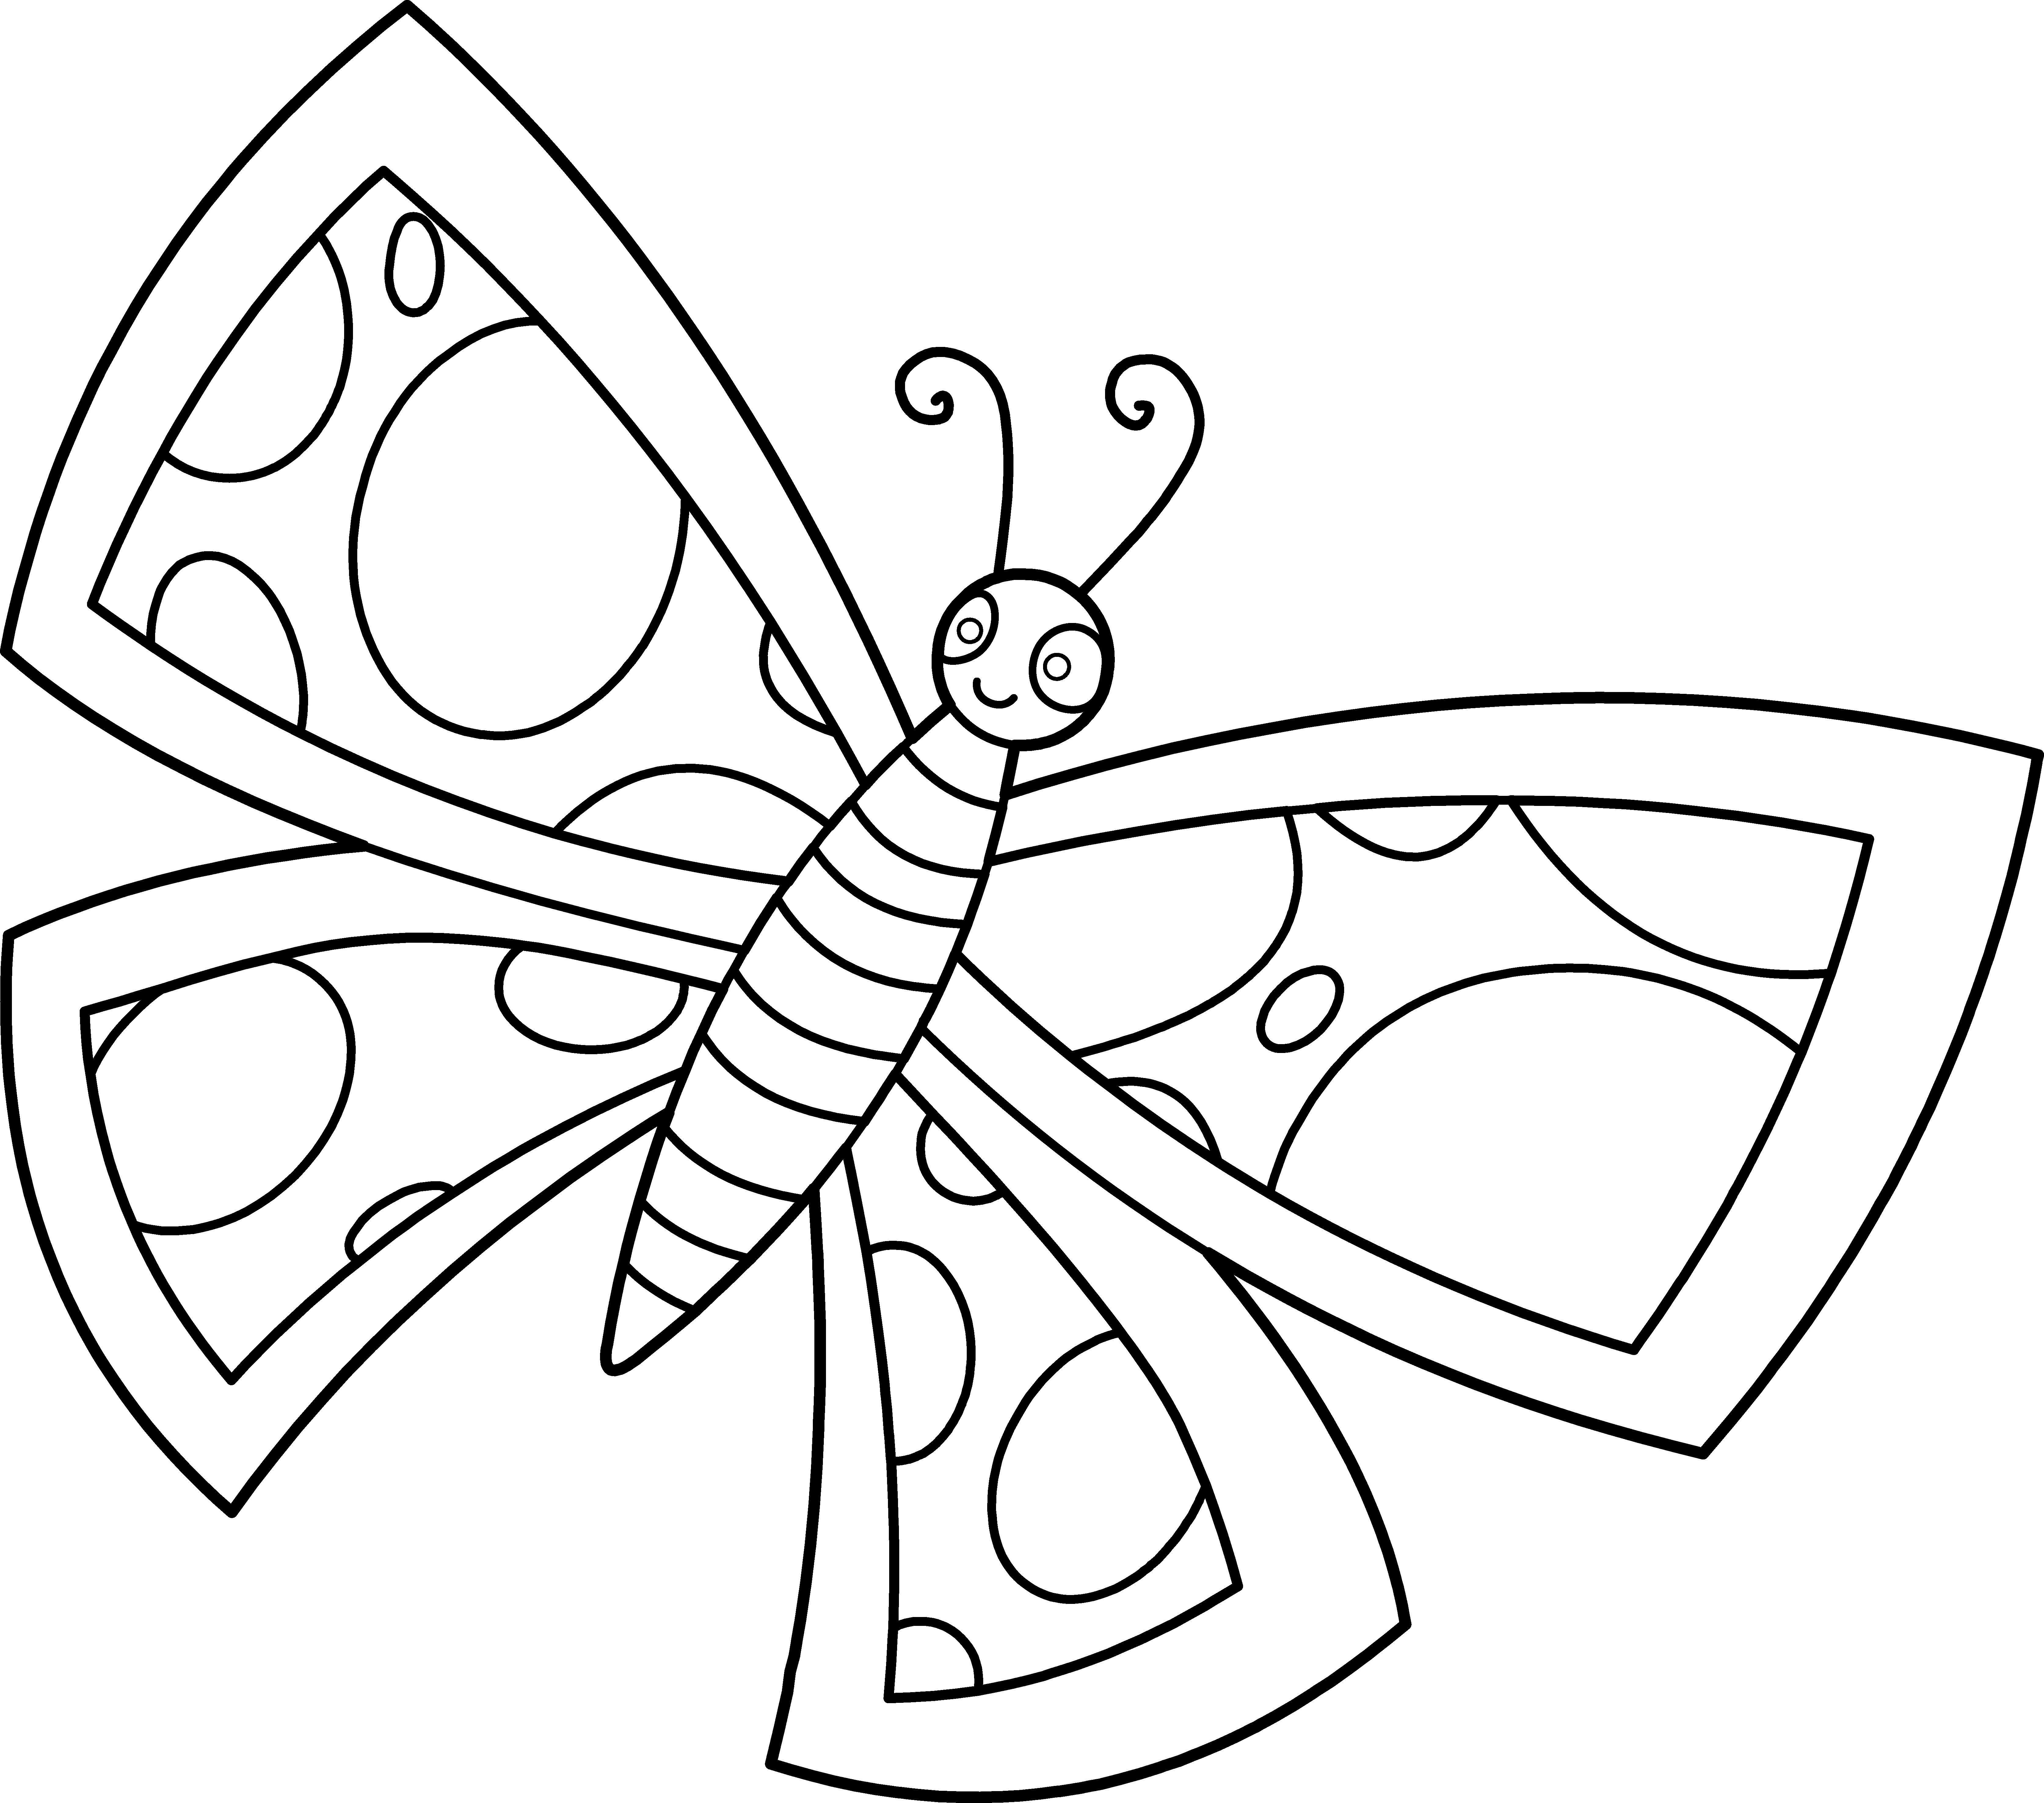 Butterfly Line Art - Cliparts.co